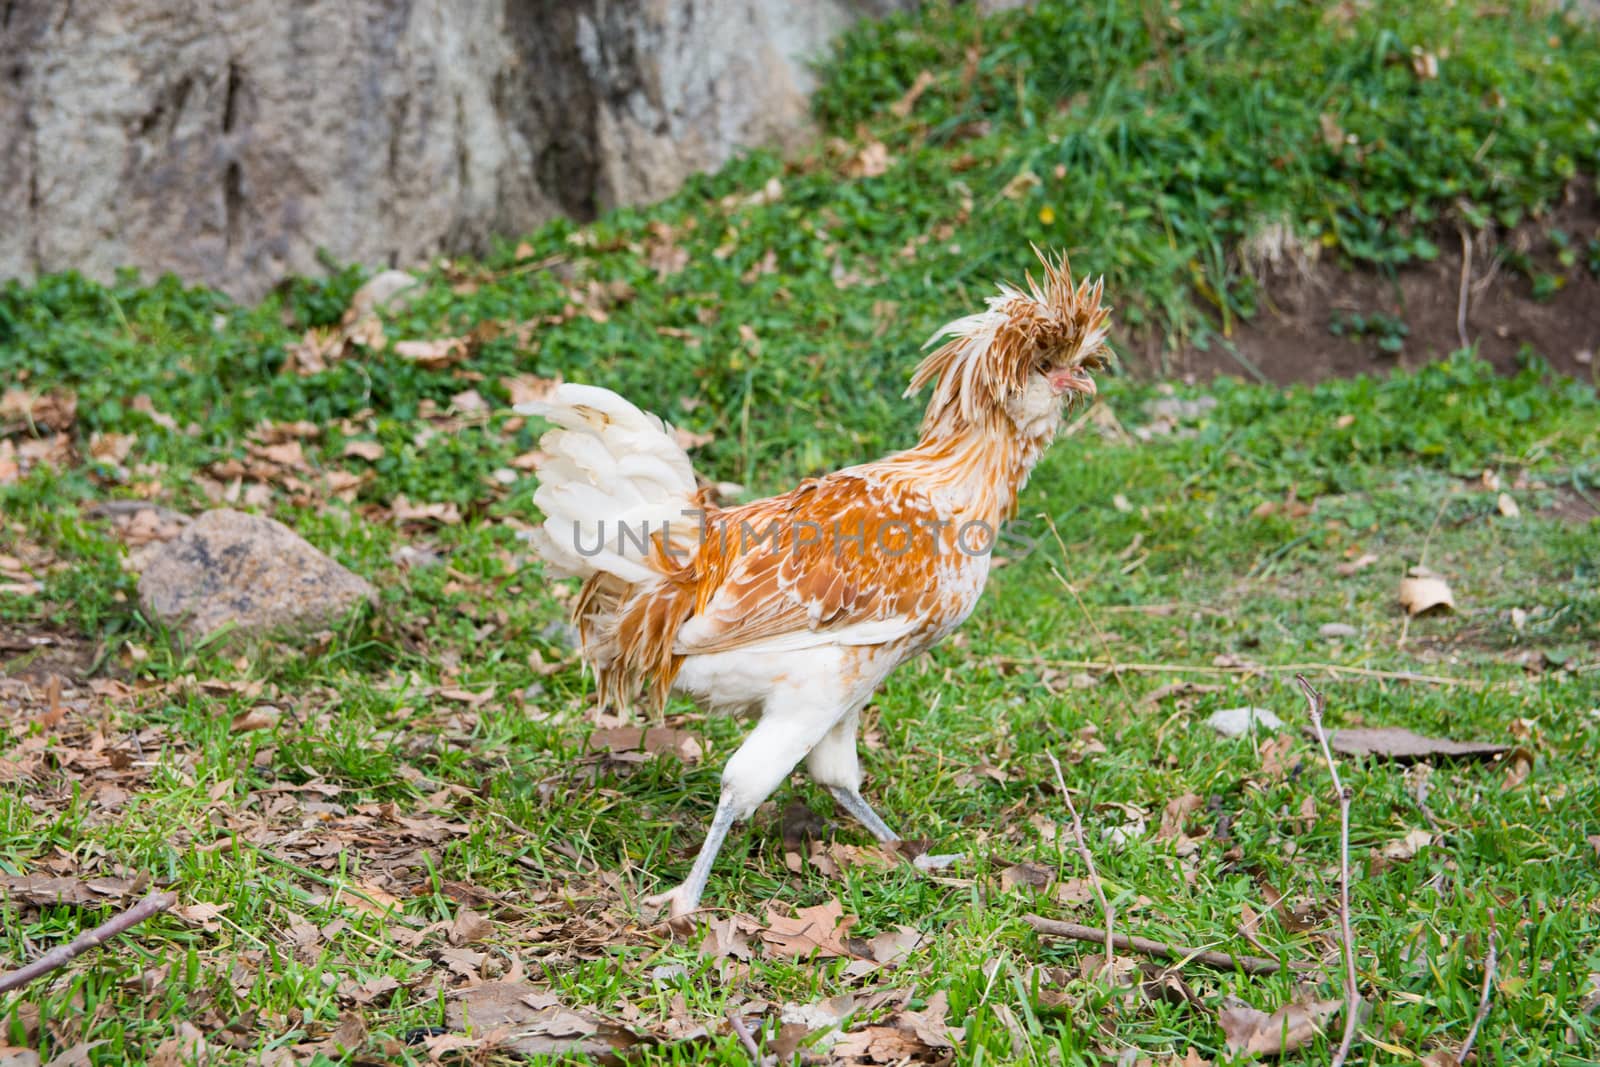 Polish chicken. there are pointed feathers covering almost the entire head